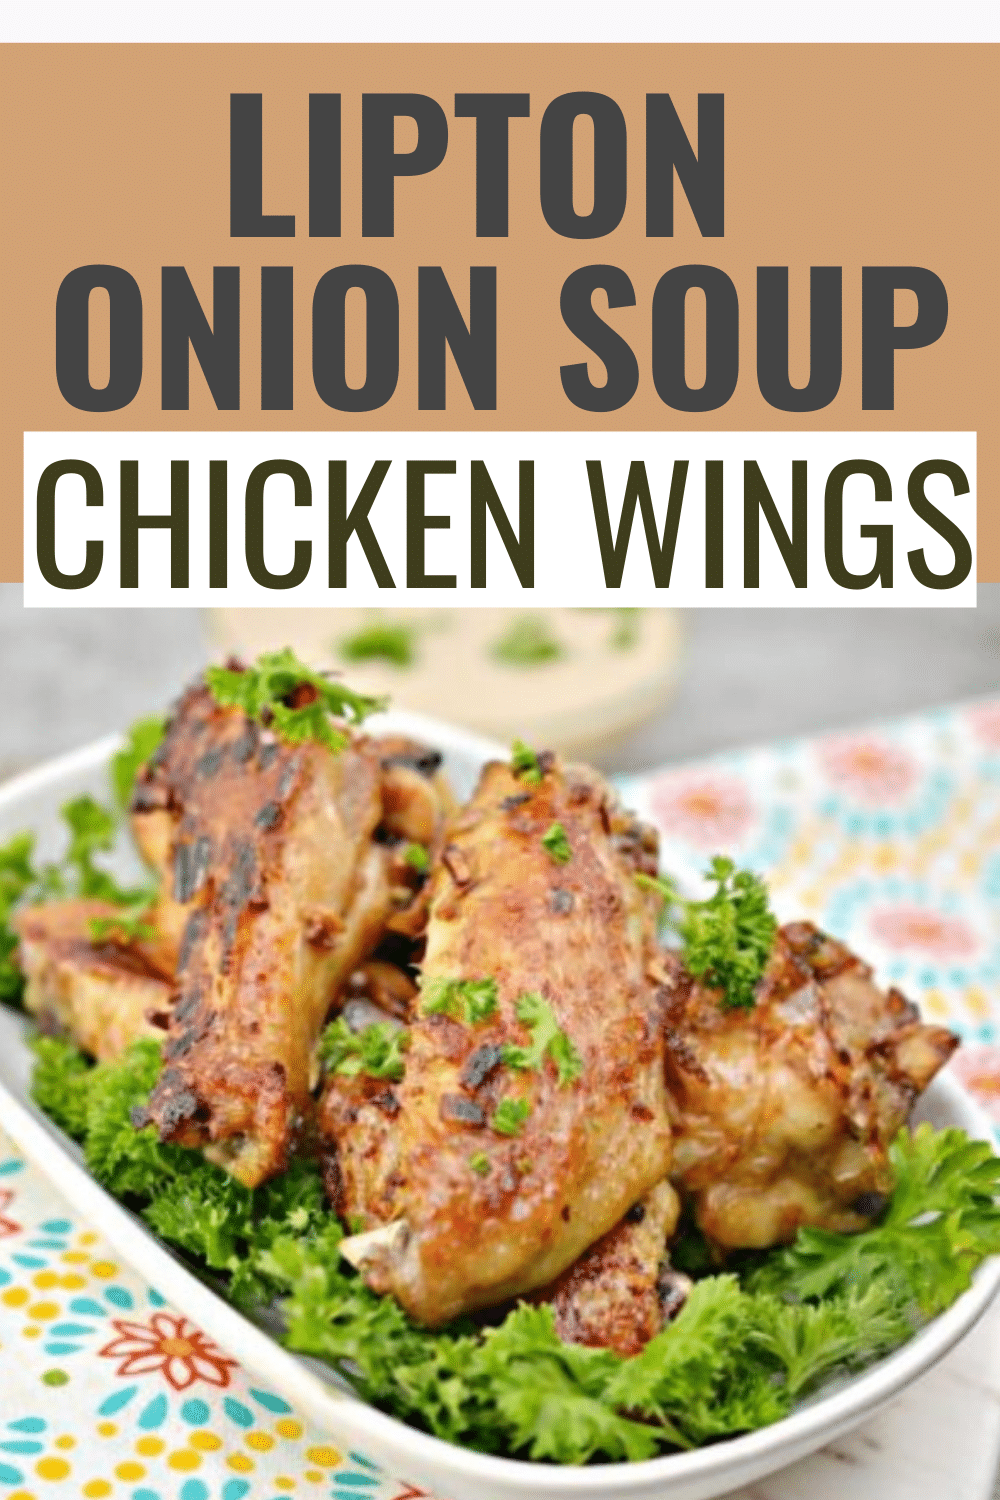 These Lipton onion soup chicken wings are so easy to make in the oven and are flavorful and delicious. This recipe only has 3 ingredients too. #chicken #chickenwings #3ingredients via @wondermomwannab